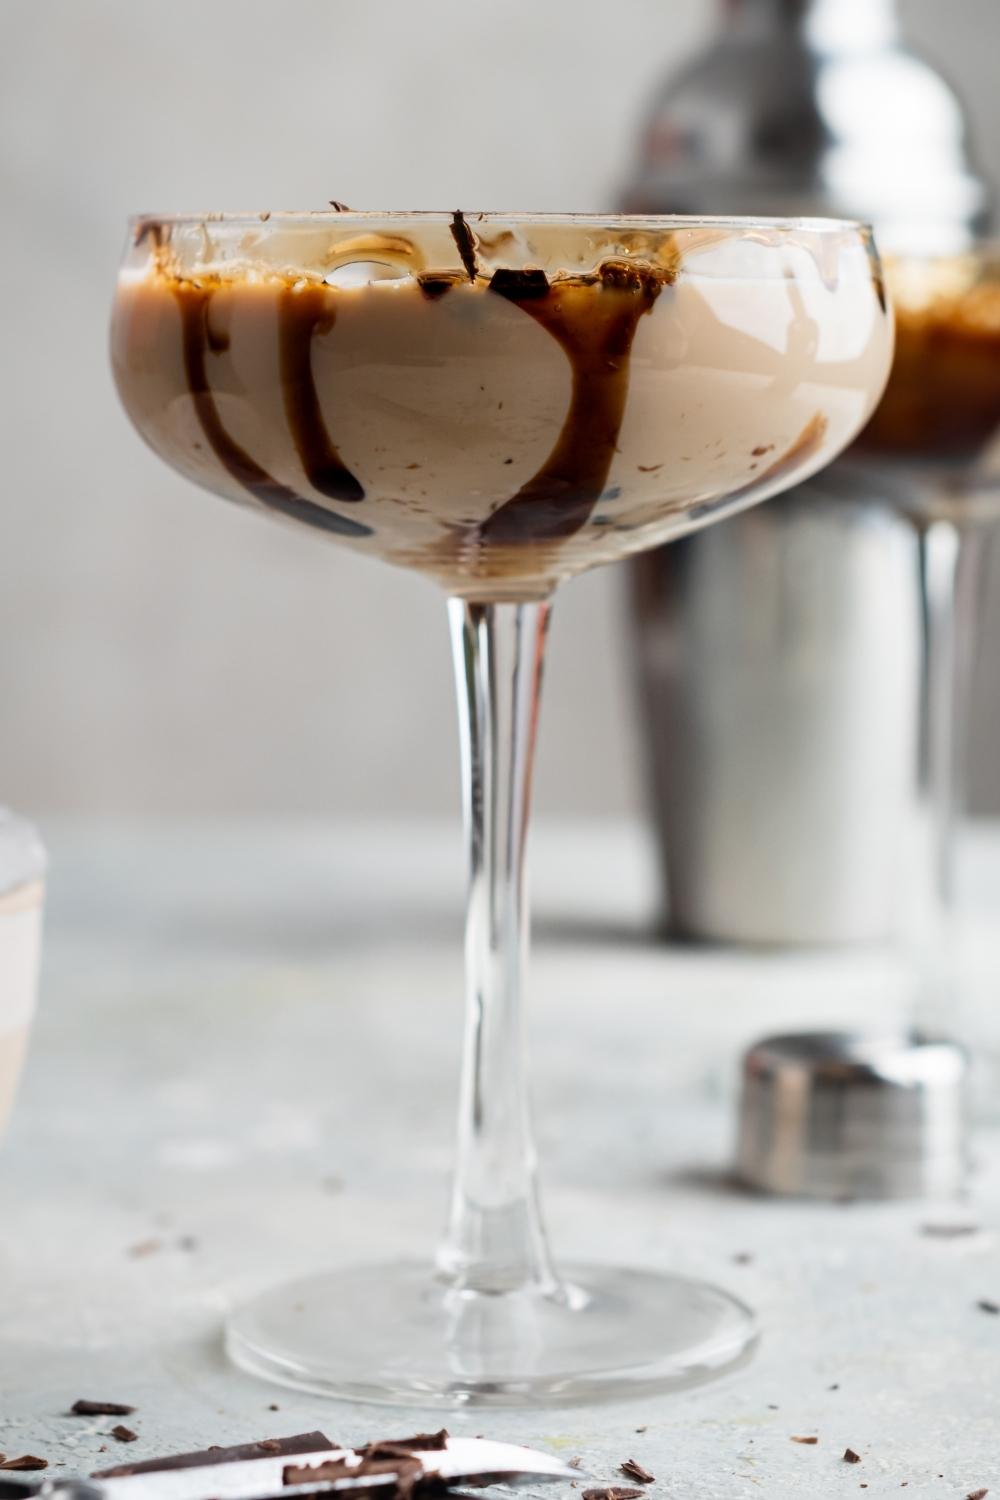 A profile view of a mudslide cocktail in a cocktail stemmed glass. It is garnished with shaved chocolate and there is drizzled chocolate on the inside of the glass.